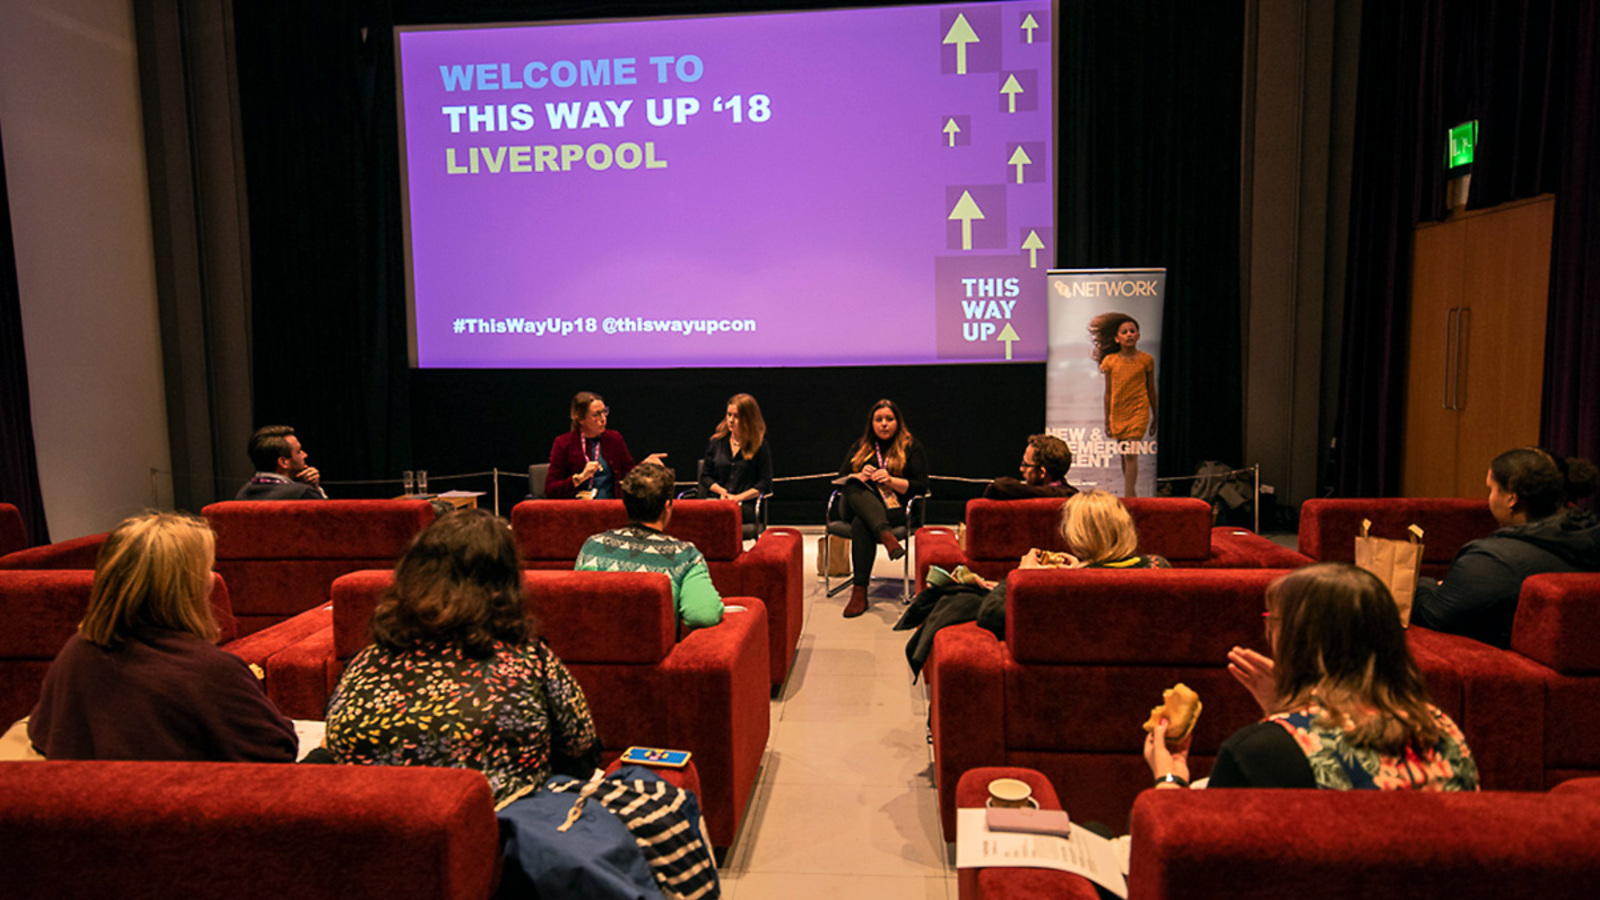 The BFI NETWORK team present at This Way Up 2018